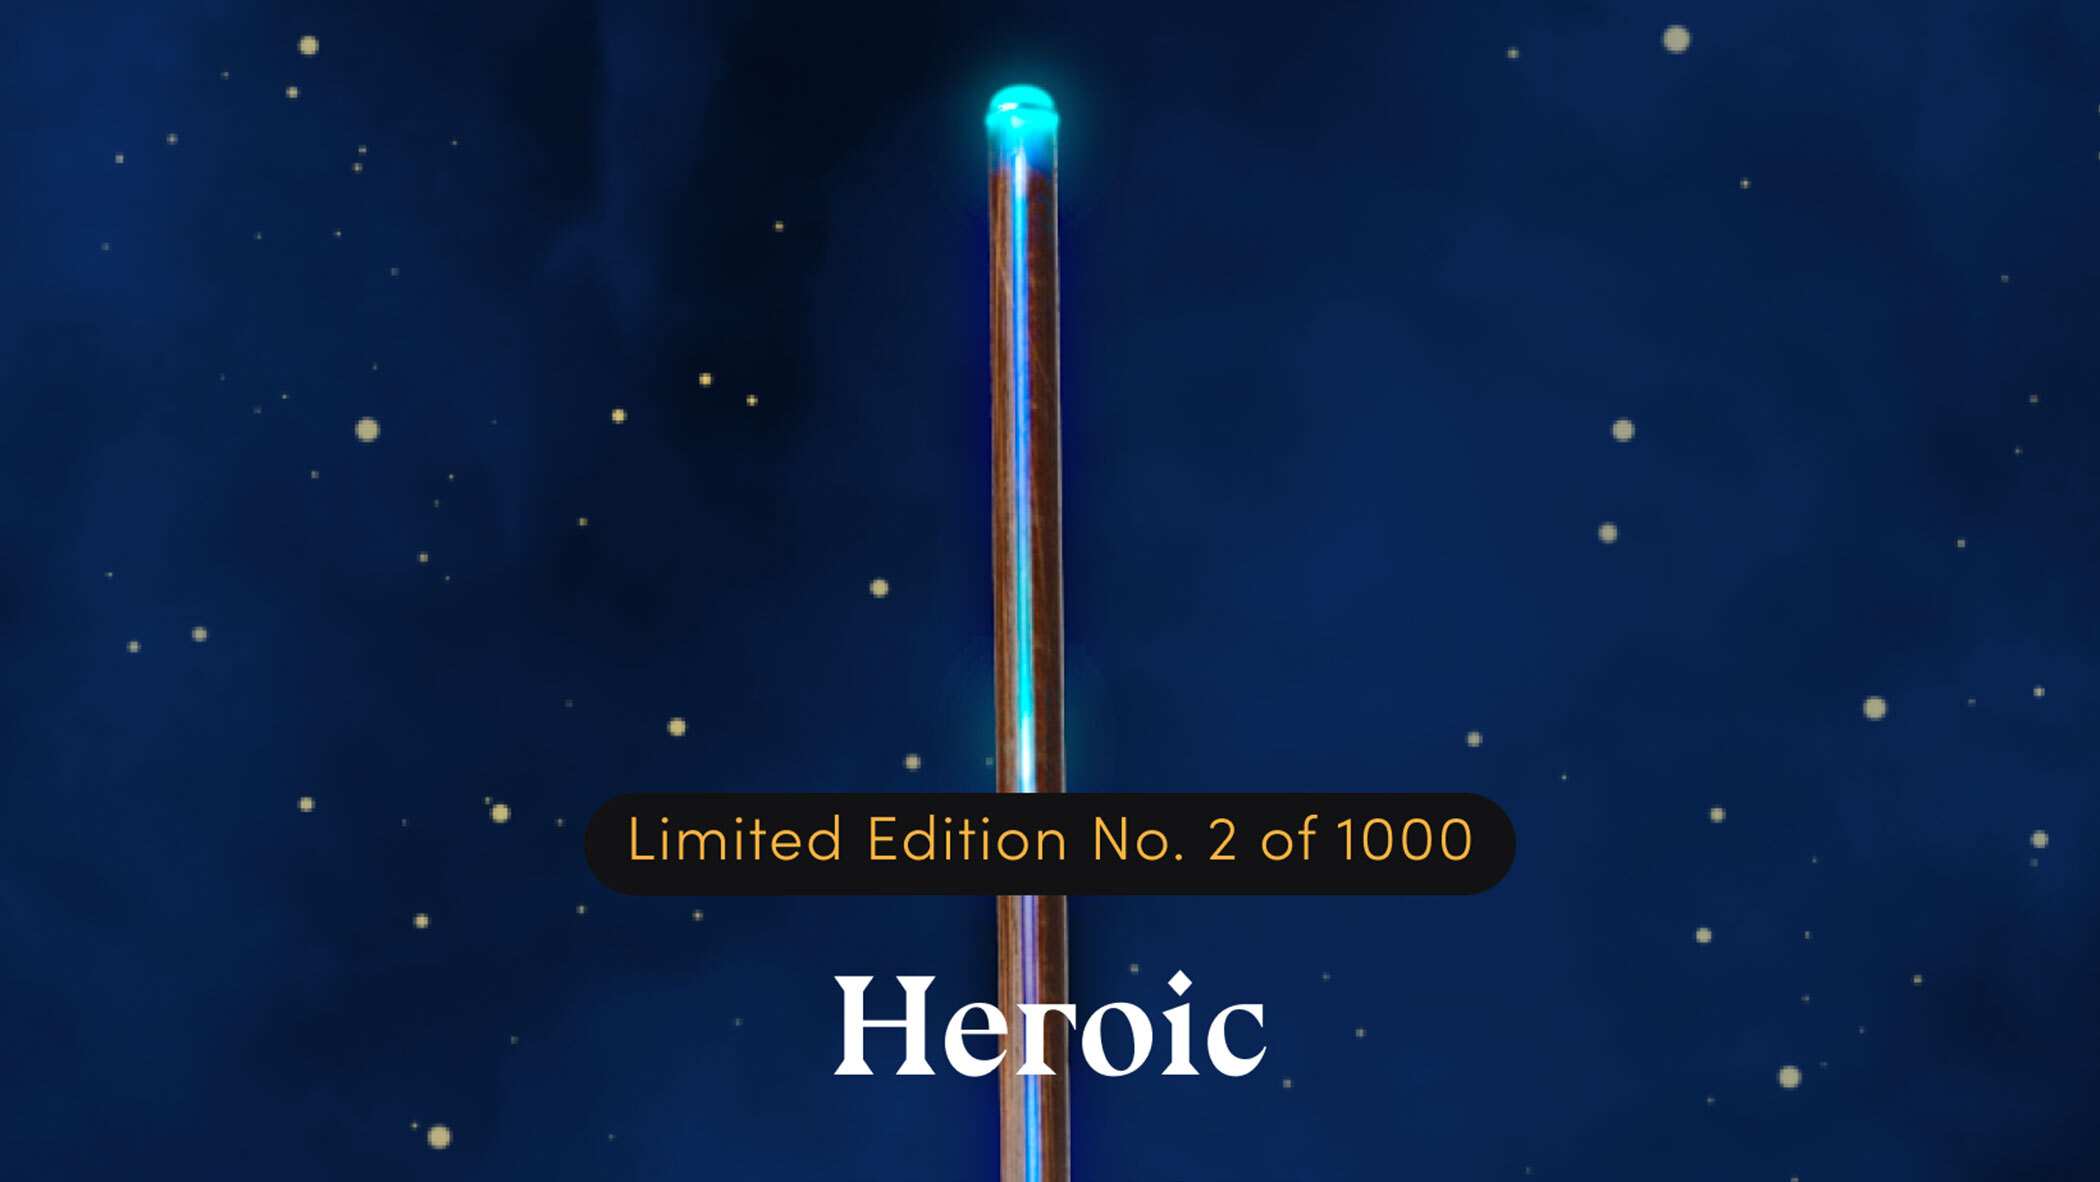 Heroic_Limited_Edition_Number_2100x1182